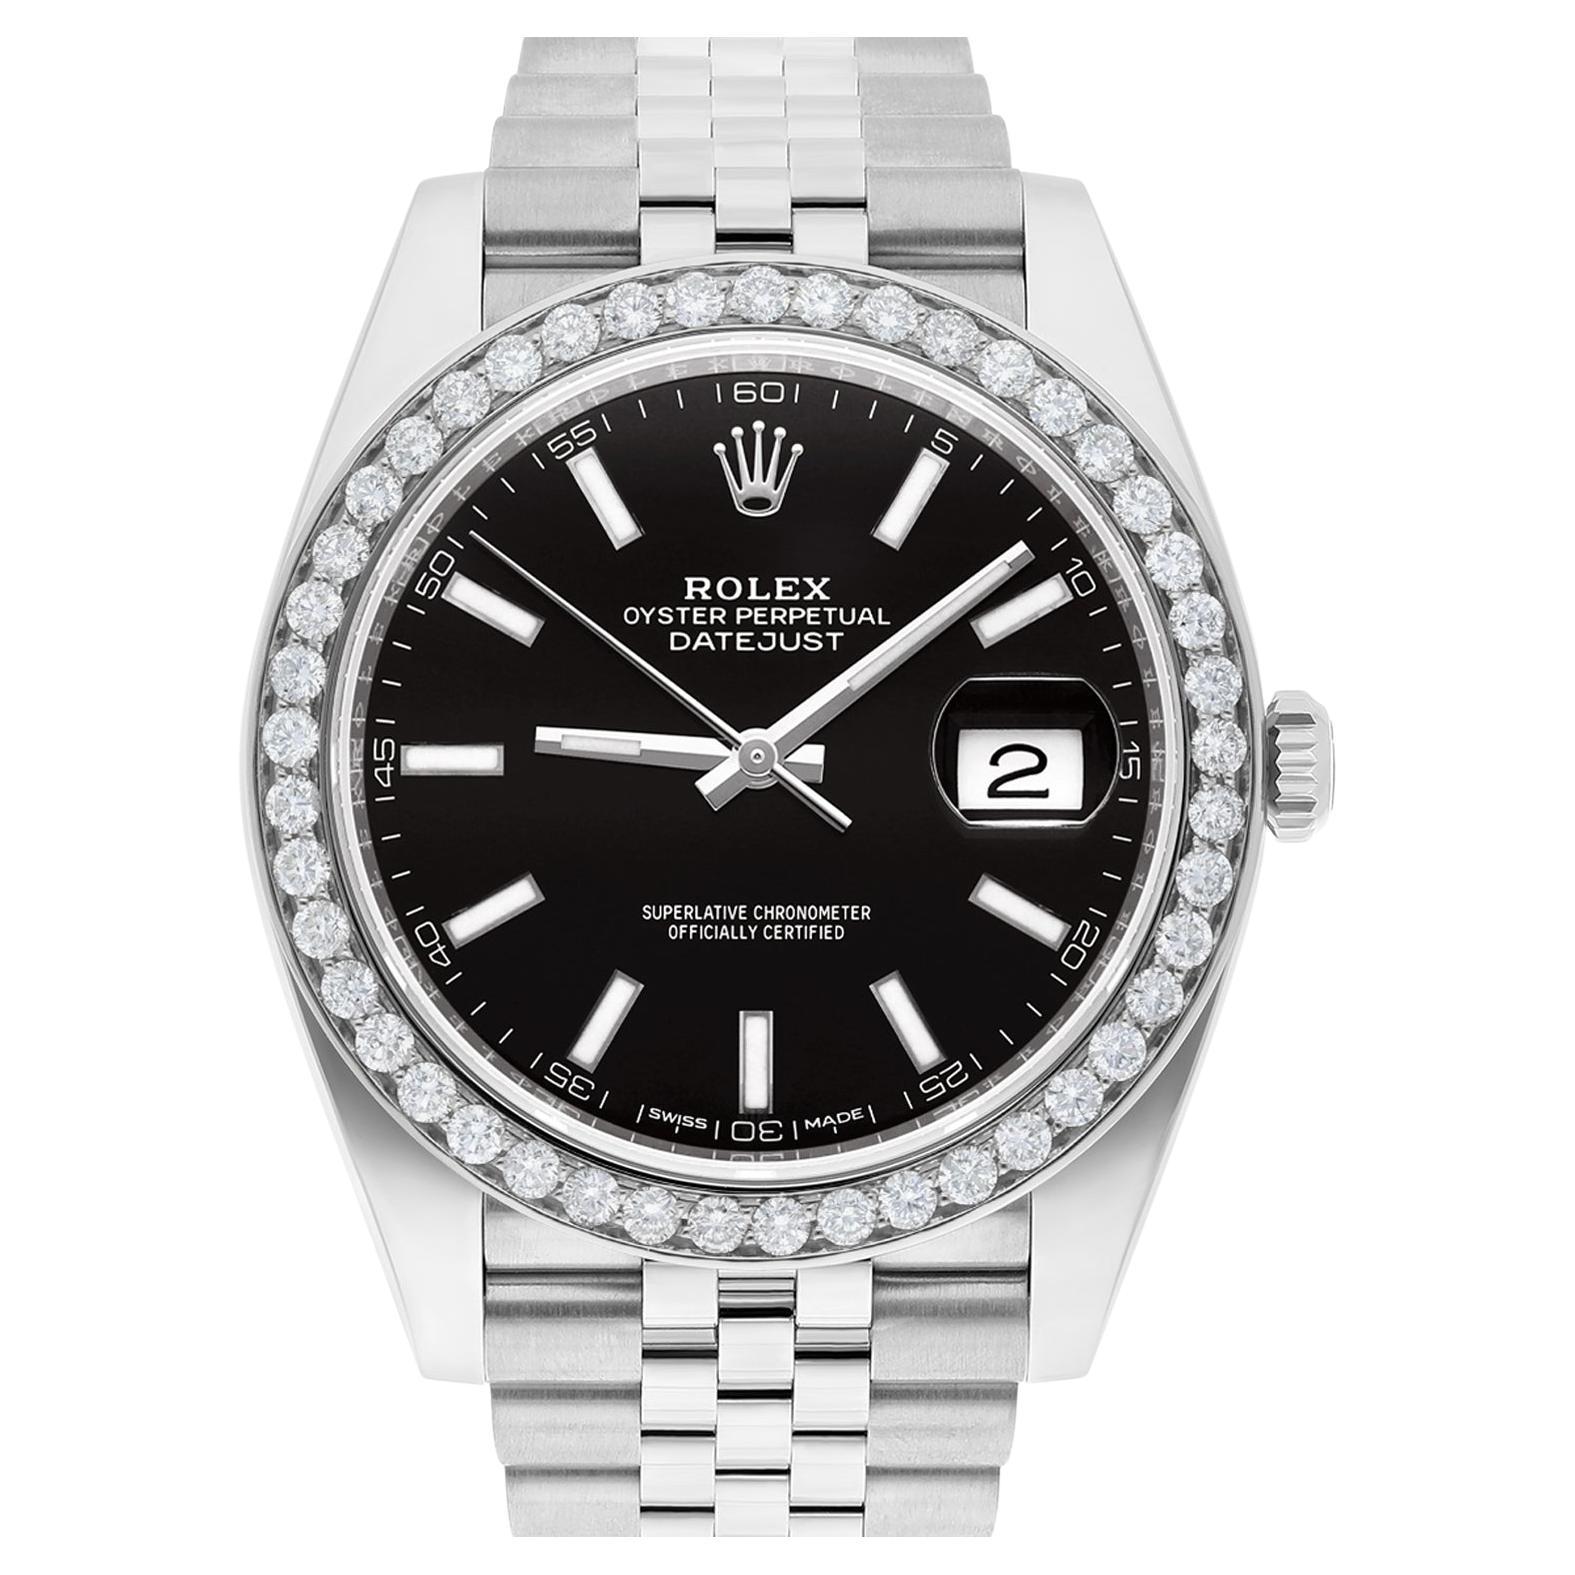 Do all Rolex watches say “Swiss-Made”?